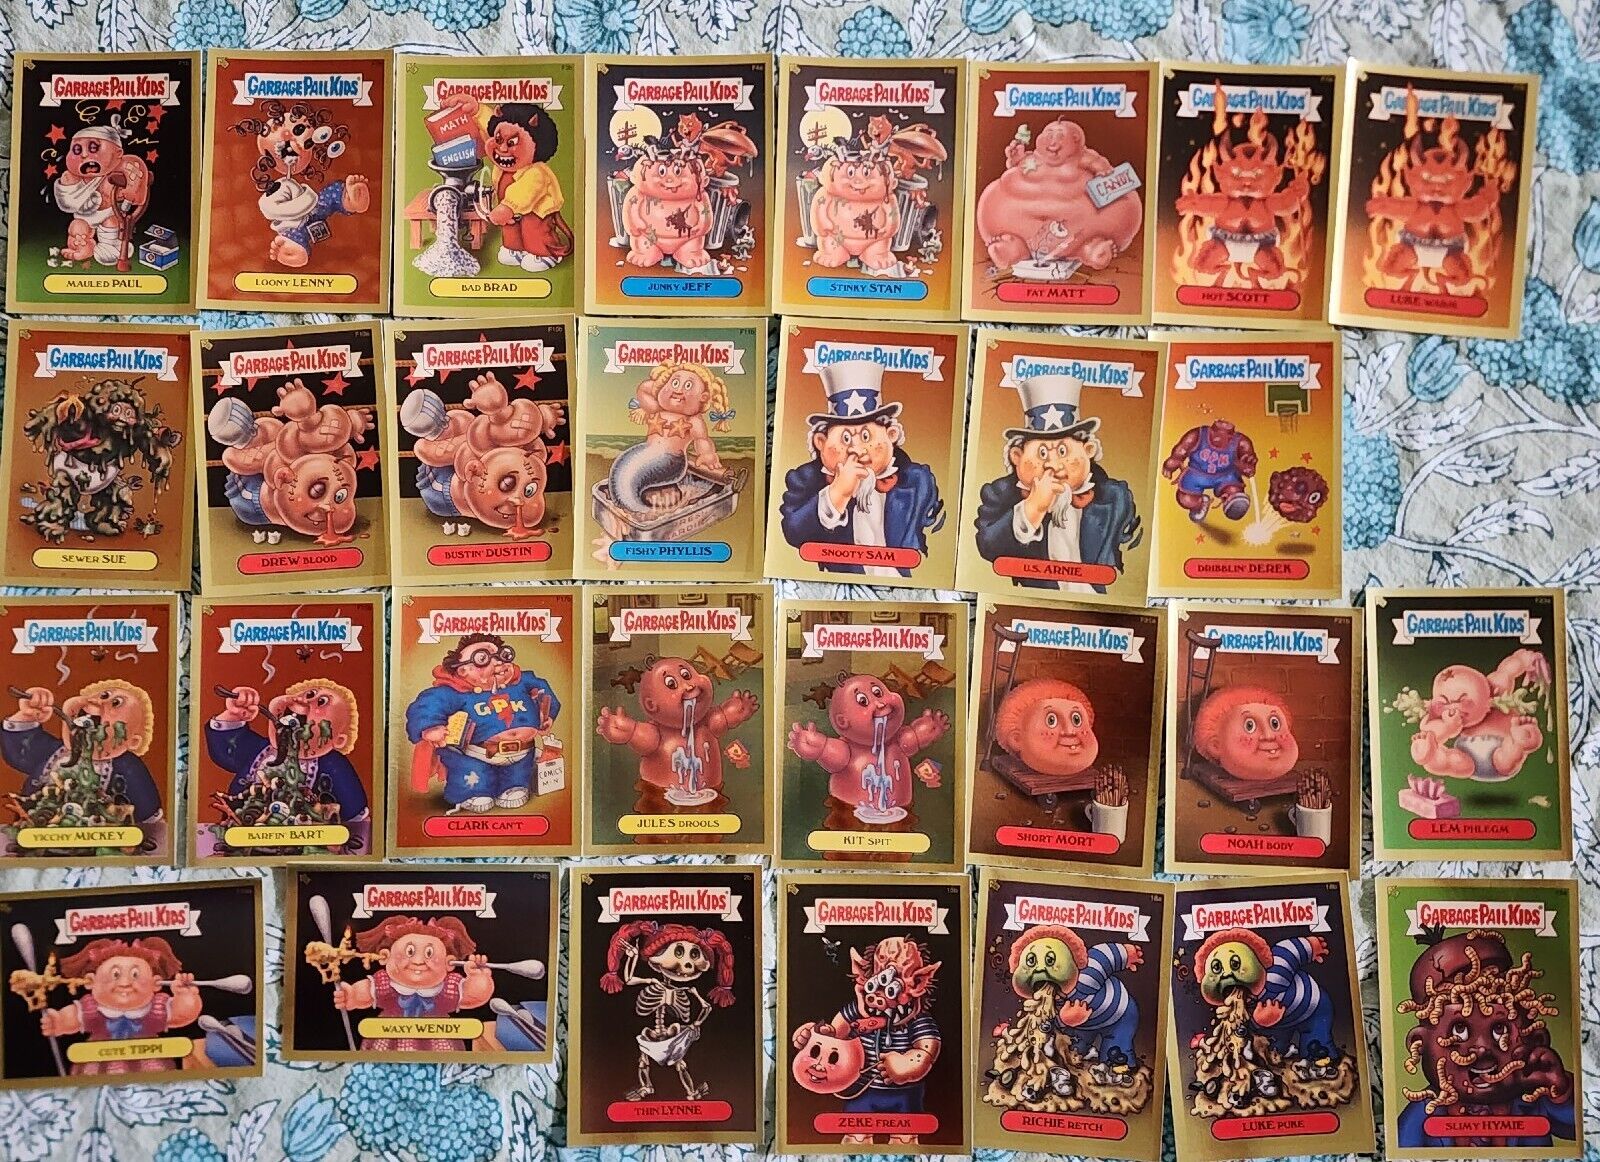 Lot of 22 2003 2004 Gold Foil Garbage Pail Kids Trading Gum Cards Topps 